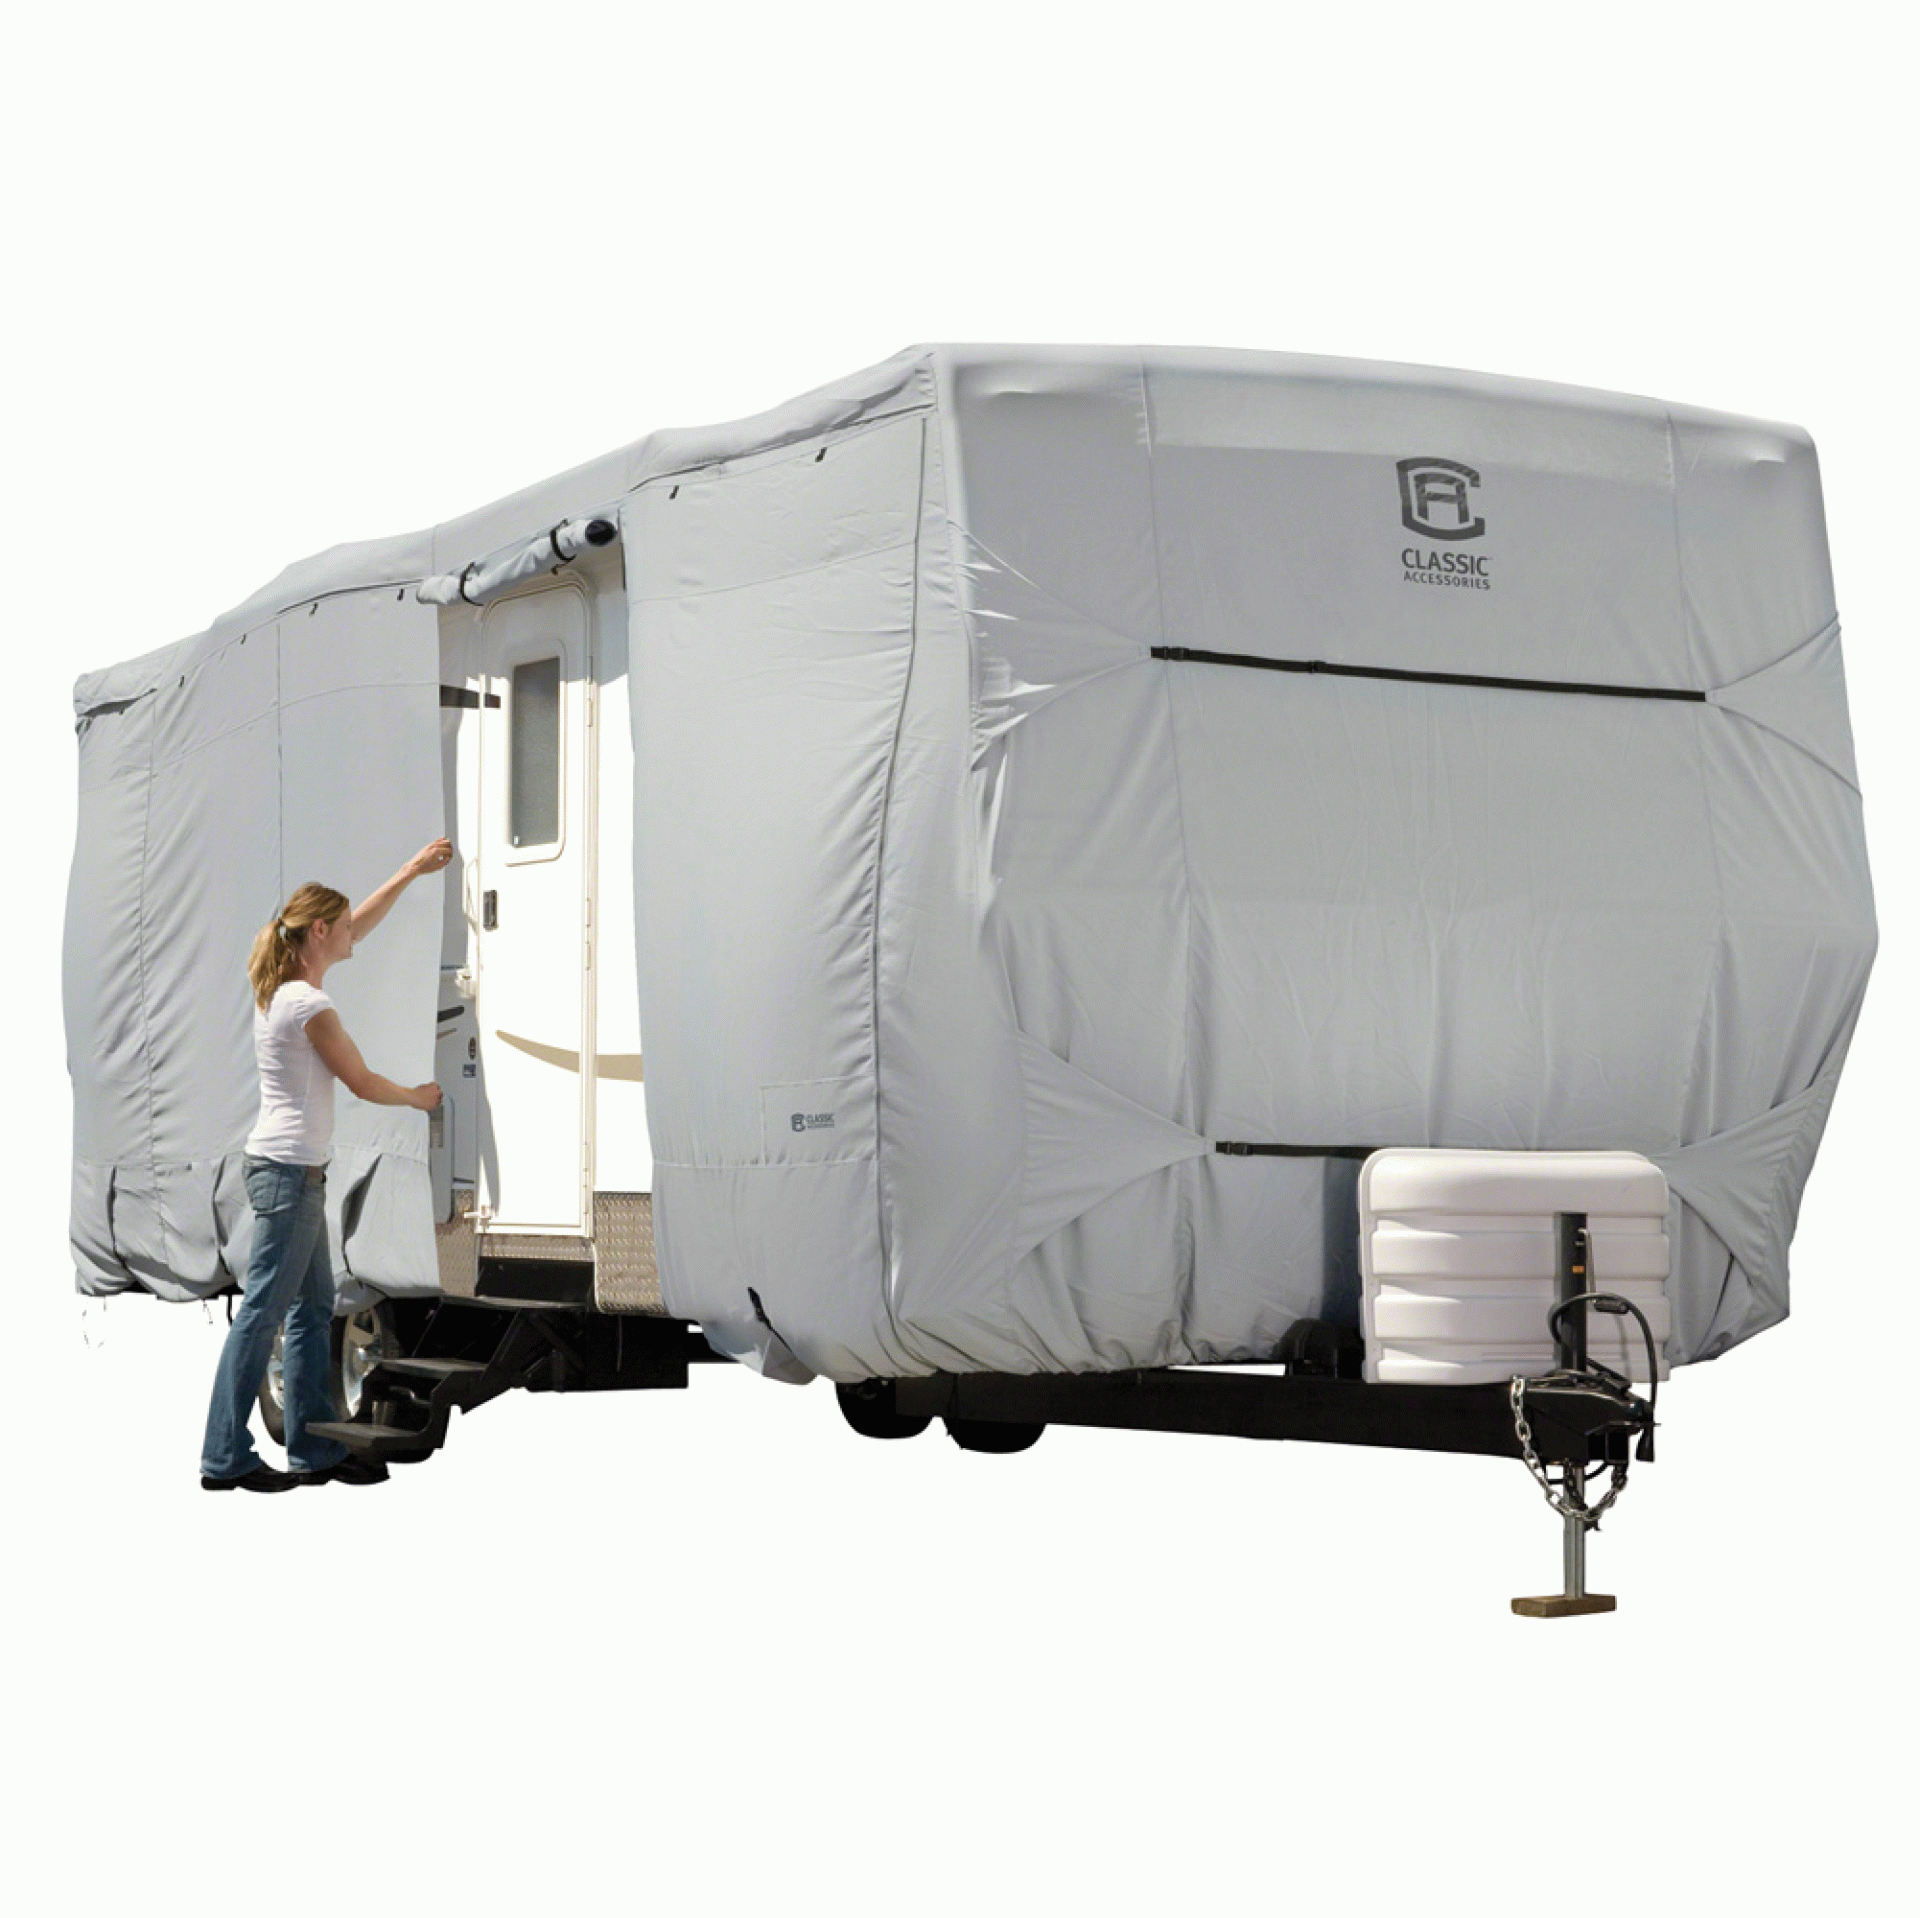 CLASSIC ACCESSORIES | 80-134-141001-00 | PermaPRO Travel Trailer Cover 18' - 20'L 118" Height